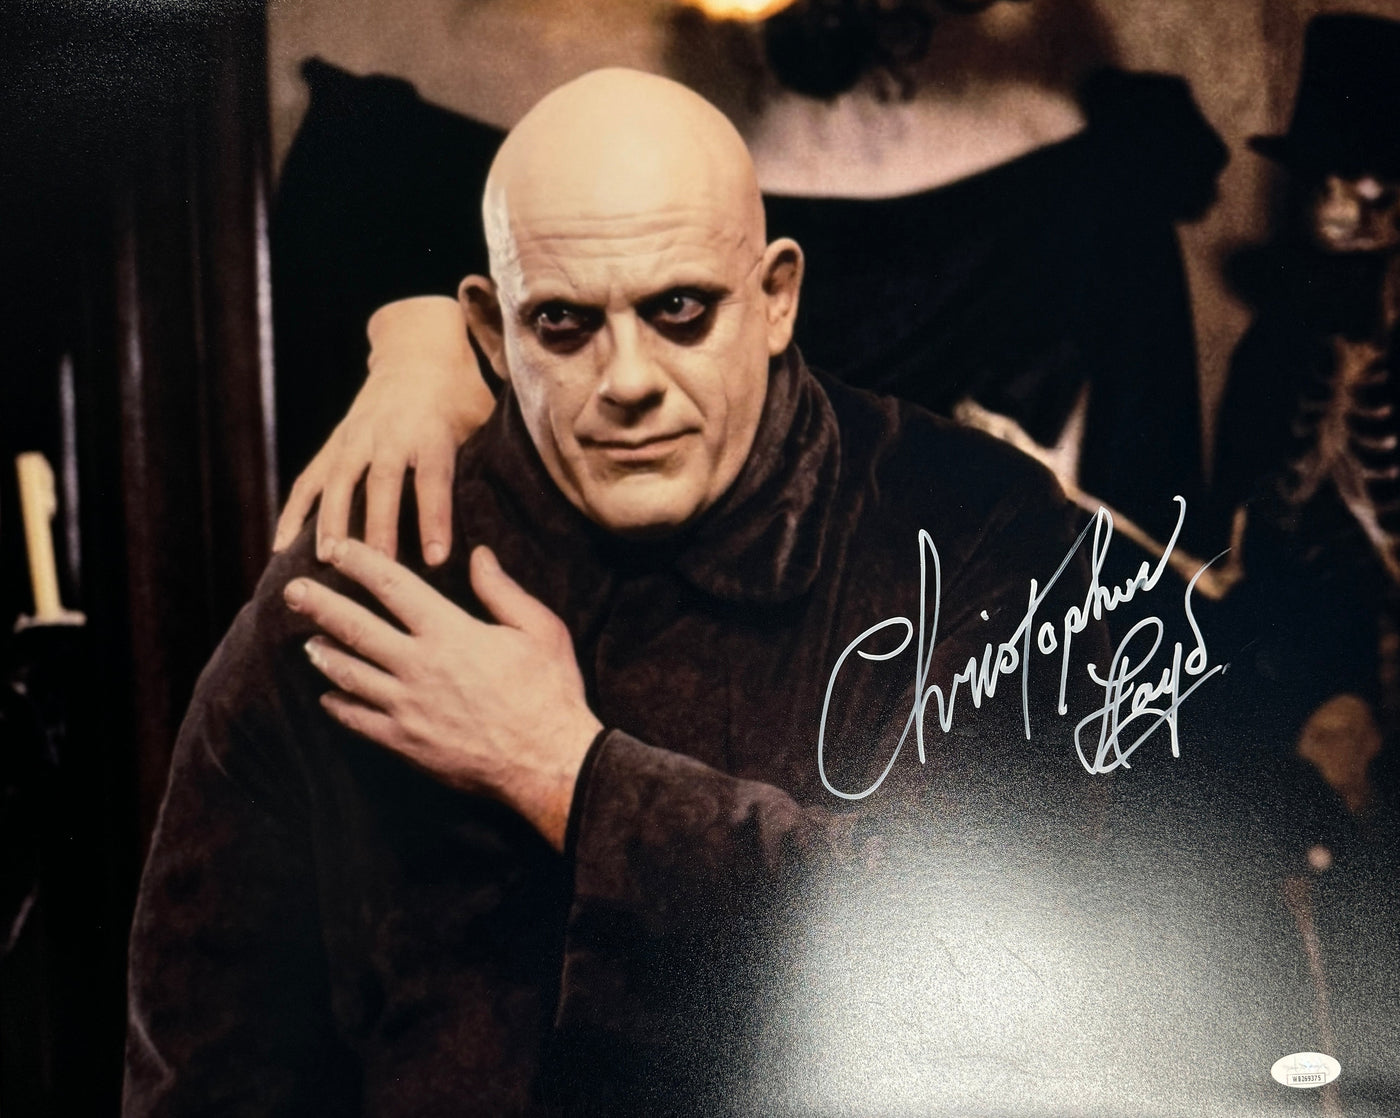 Christopher Lloyd Signed 16x20 Photo The Addams Family Autographed JSA COA 3